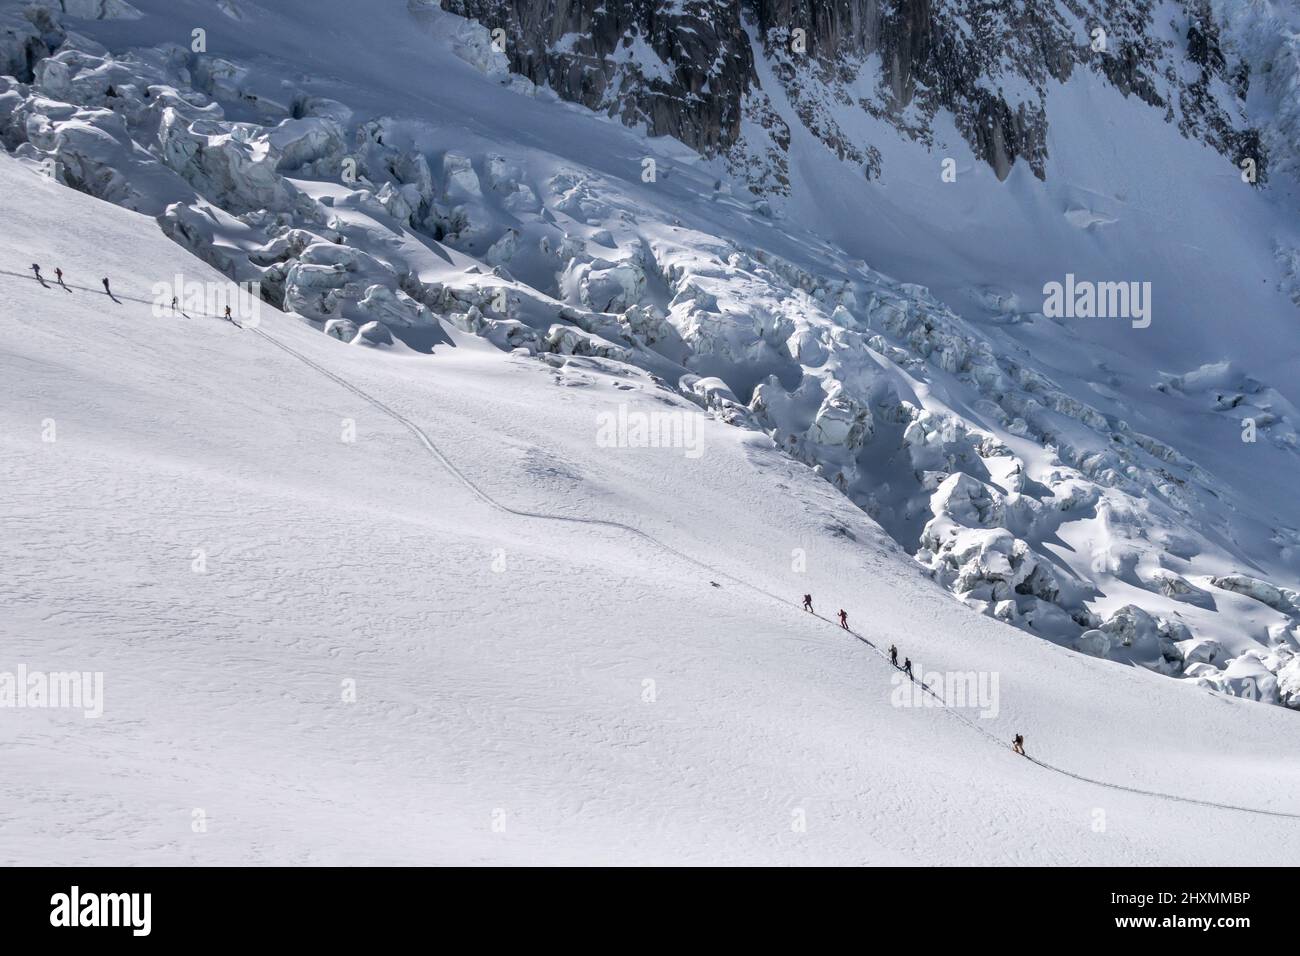 Two groups of skiers touring up a track along the Periades glacier towards the Periades range of mountain peaks above the Vallee Blanche with numerous Stock Photo